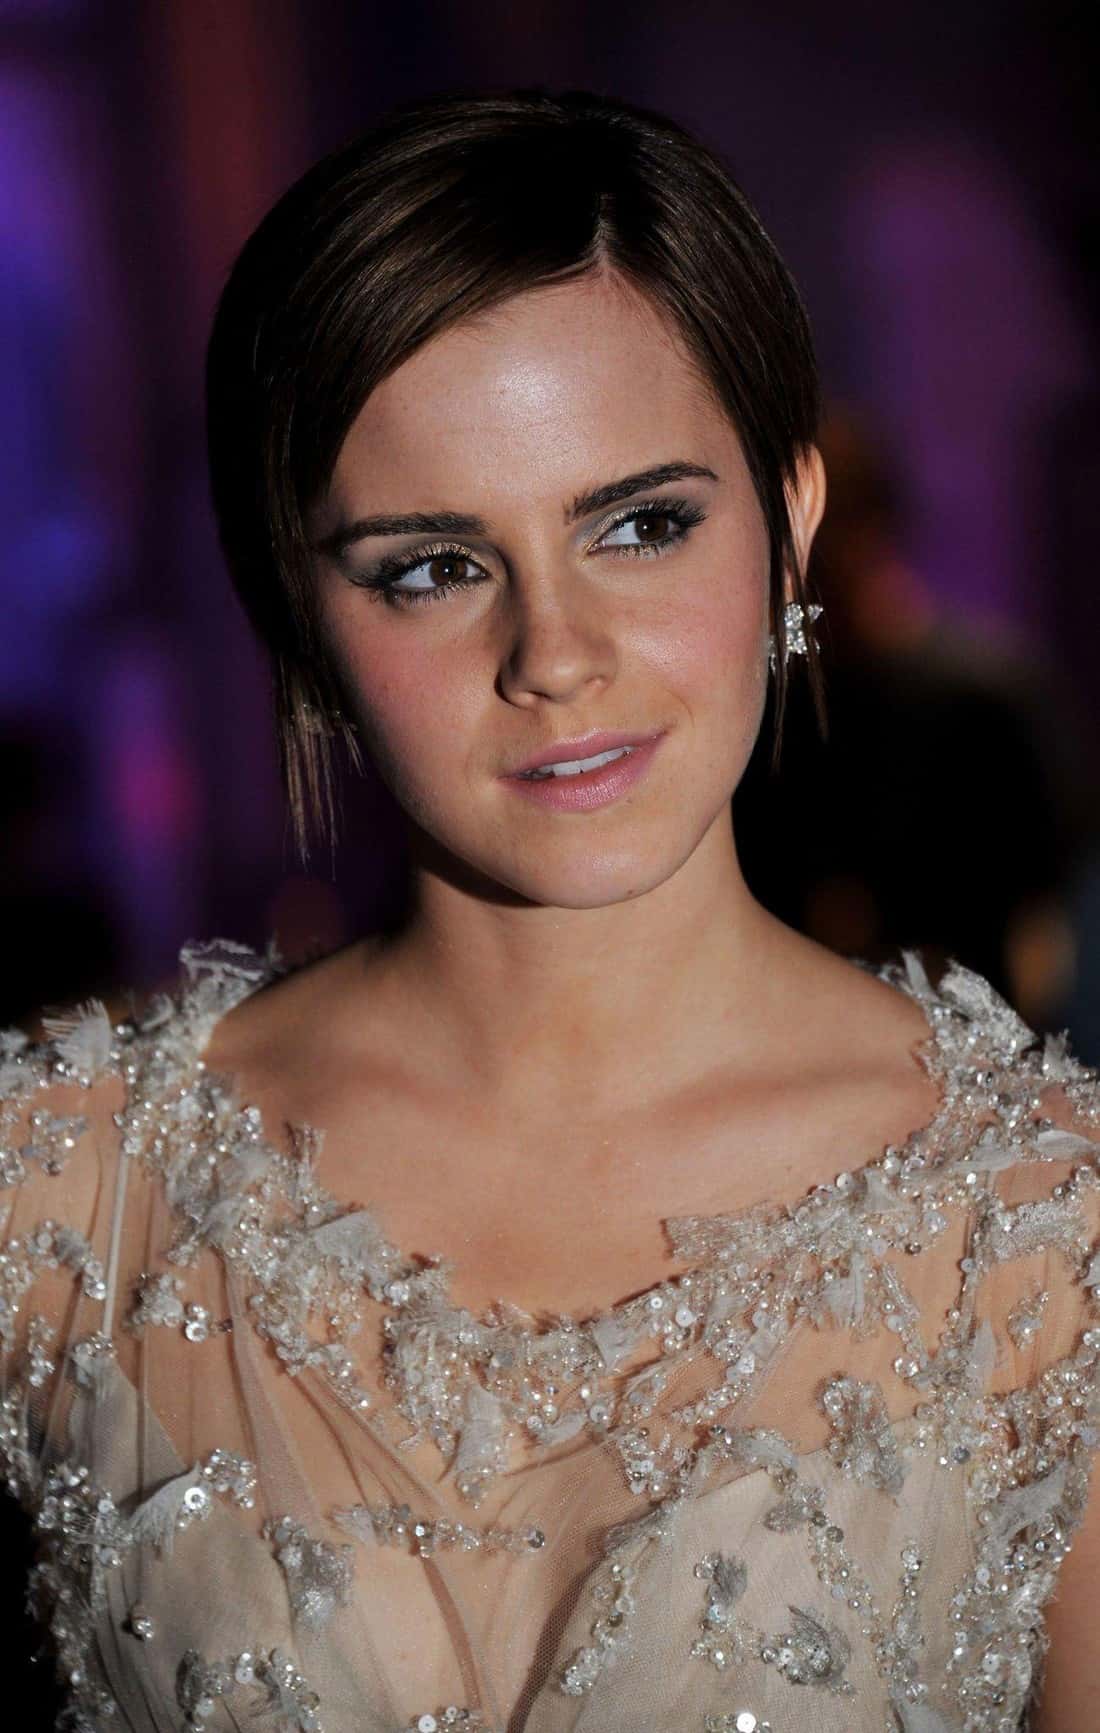 Emma Watson Shines in Elie Saab Dress at Harry Potter 7 Part 2 Afterparty